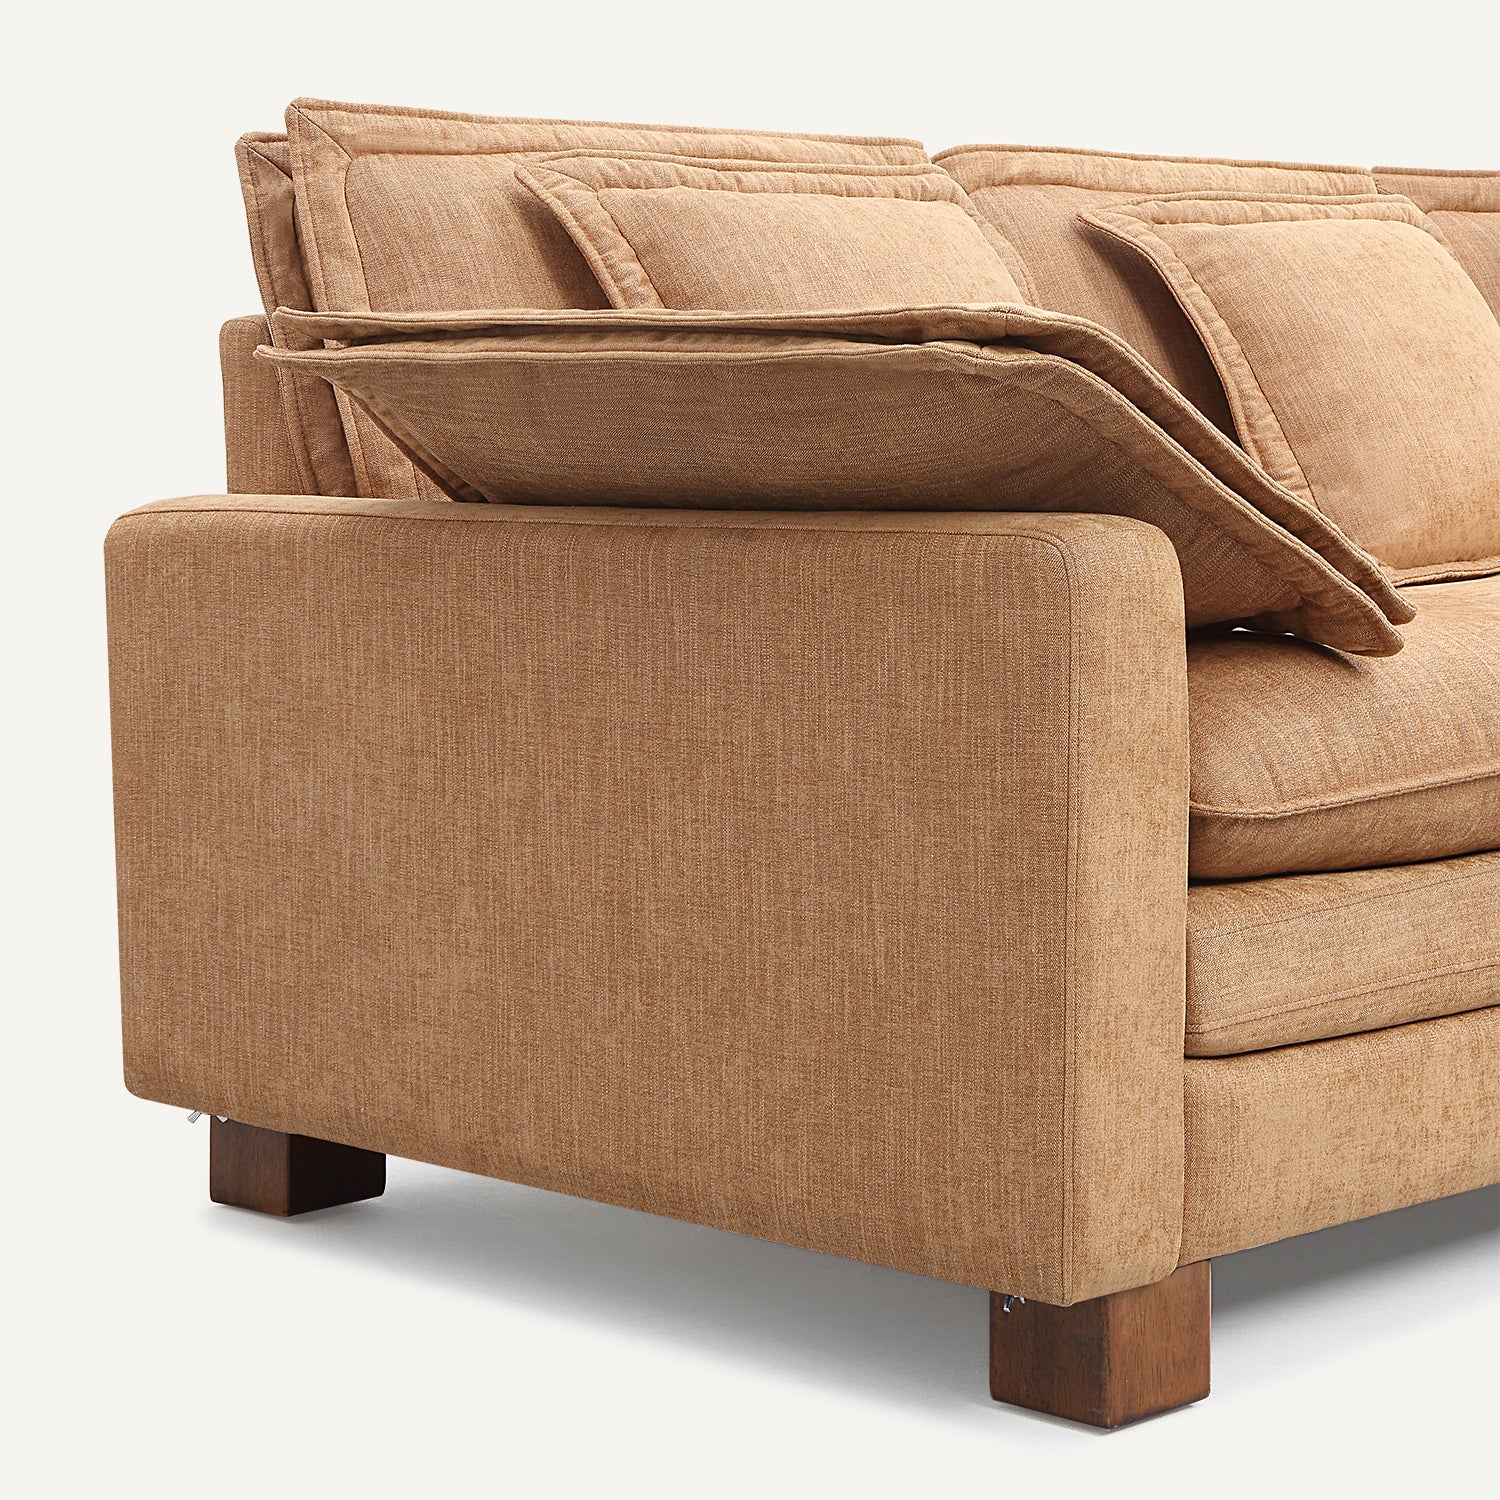 Stacked Tan Linen 4-Seat Sofa with Ottoman